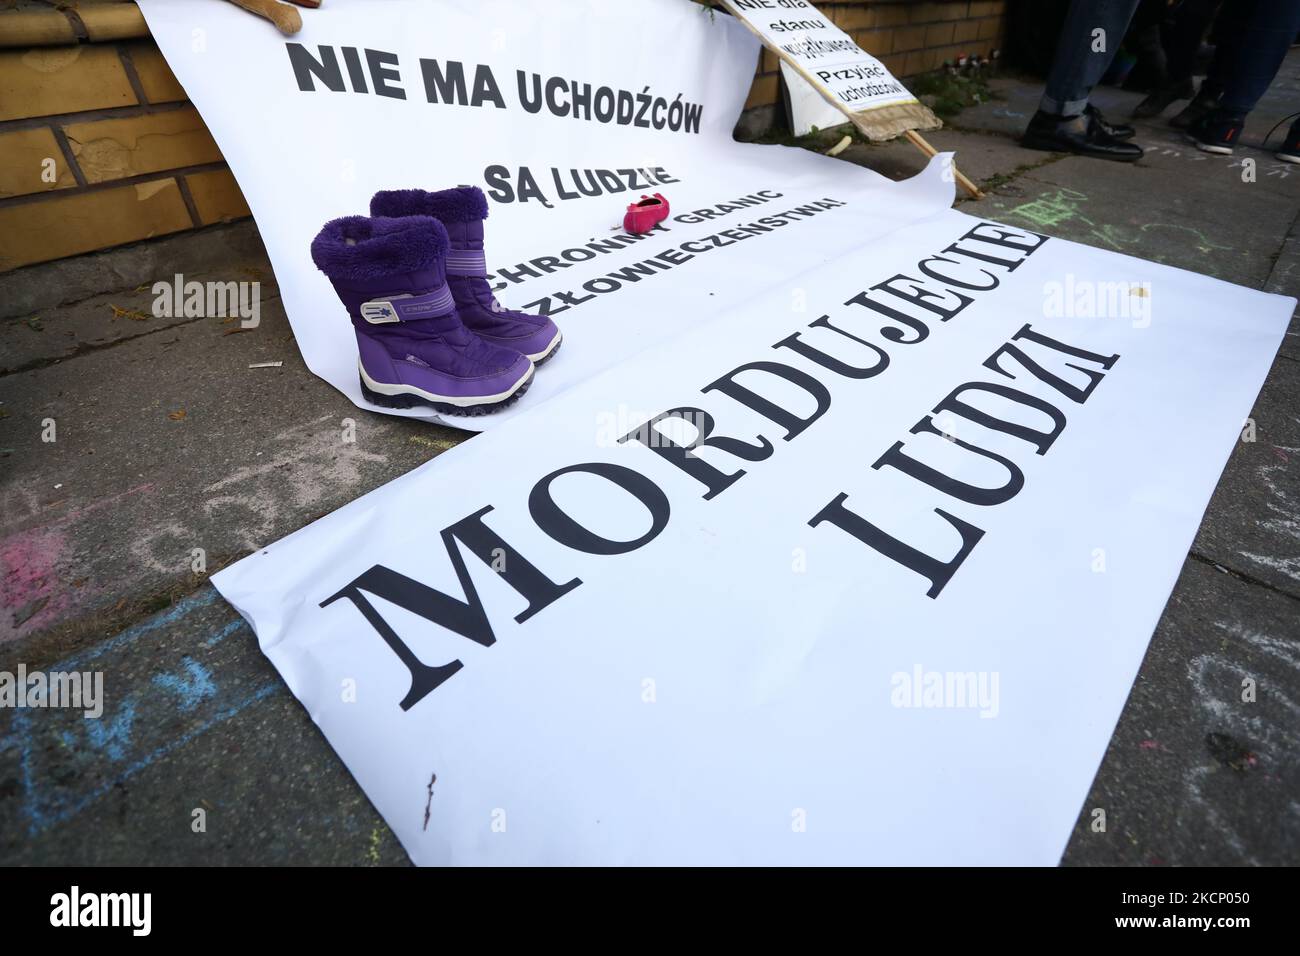 A sign reading 'You murder people' is seen in Warsaw, Poland on 01 October, 2021. About a hundred people rallied in front of the headquarters of the Polish Border Guards to protest the practice of push-backs. Thousands of migrants, mainly from Iraq have been forced over the border from Belarus into Poland and the Baltics since the start of the summer. Poland has responded by pushing-back the migraints into Belarus, a practice that is in clear defiance of interniontal regulations ane EU law. (Photo by STR/NurPhoto) Stock Photo